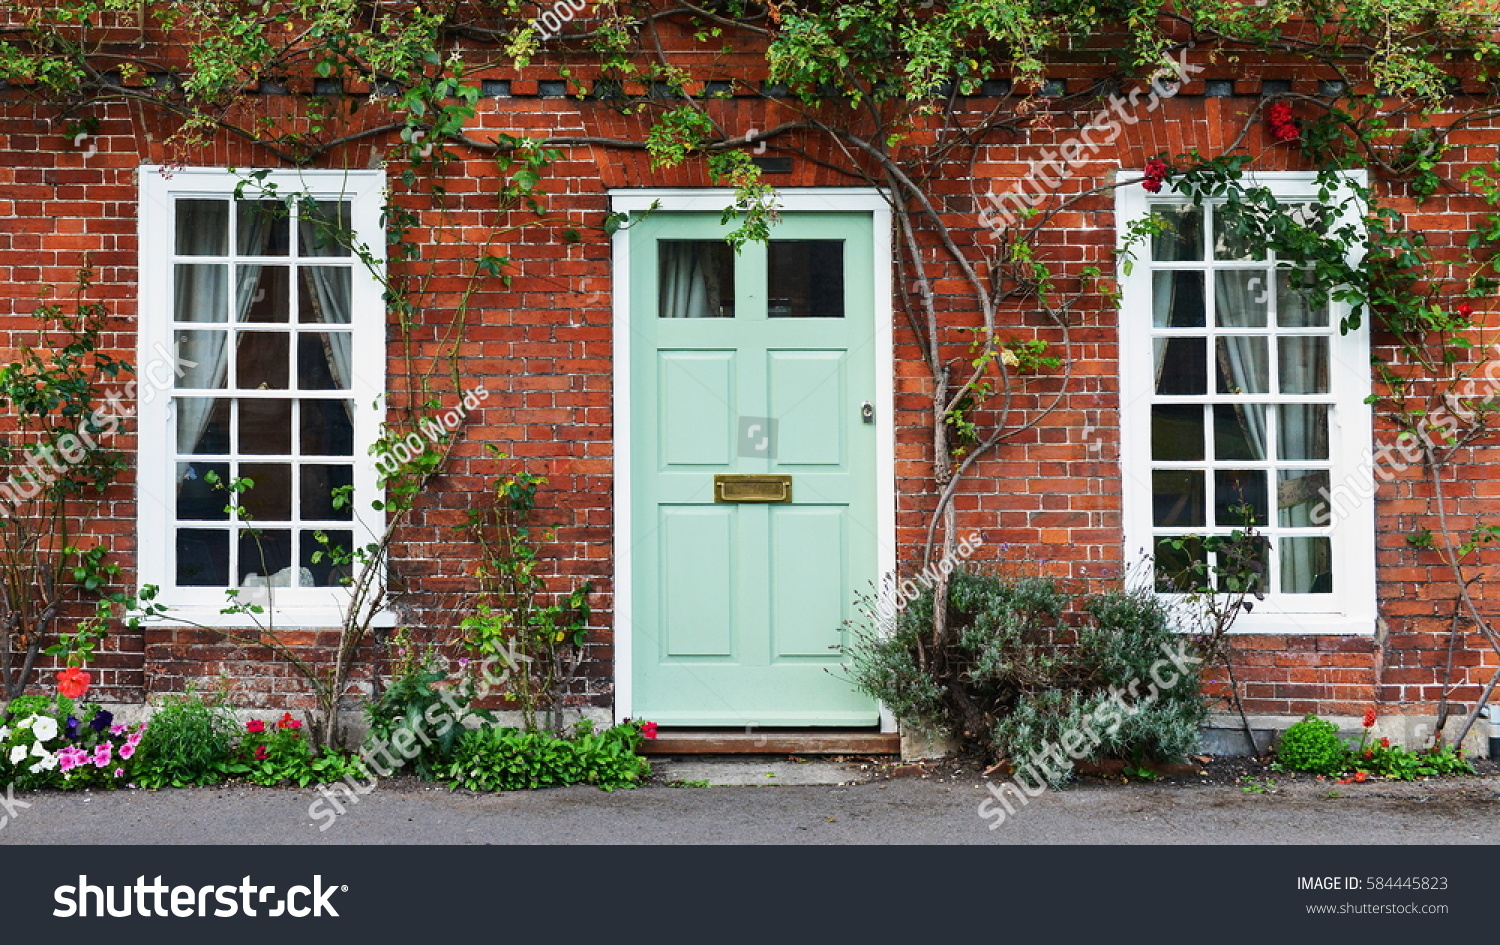 View of a Beautiful House Exterior and Front Door Seen on a London Street #584445823